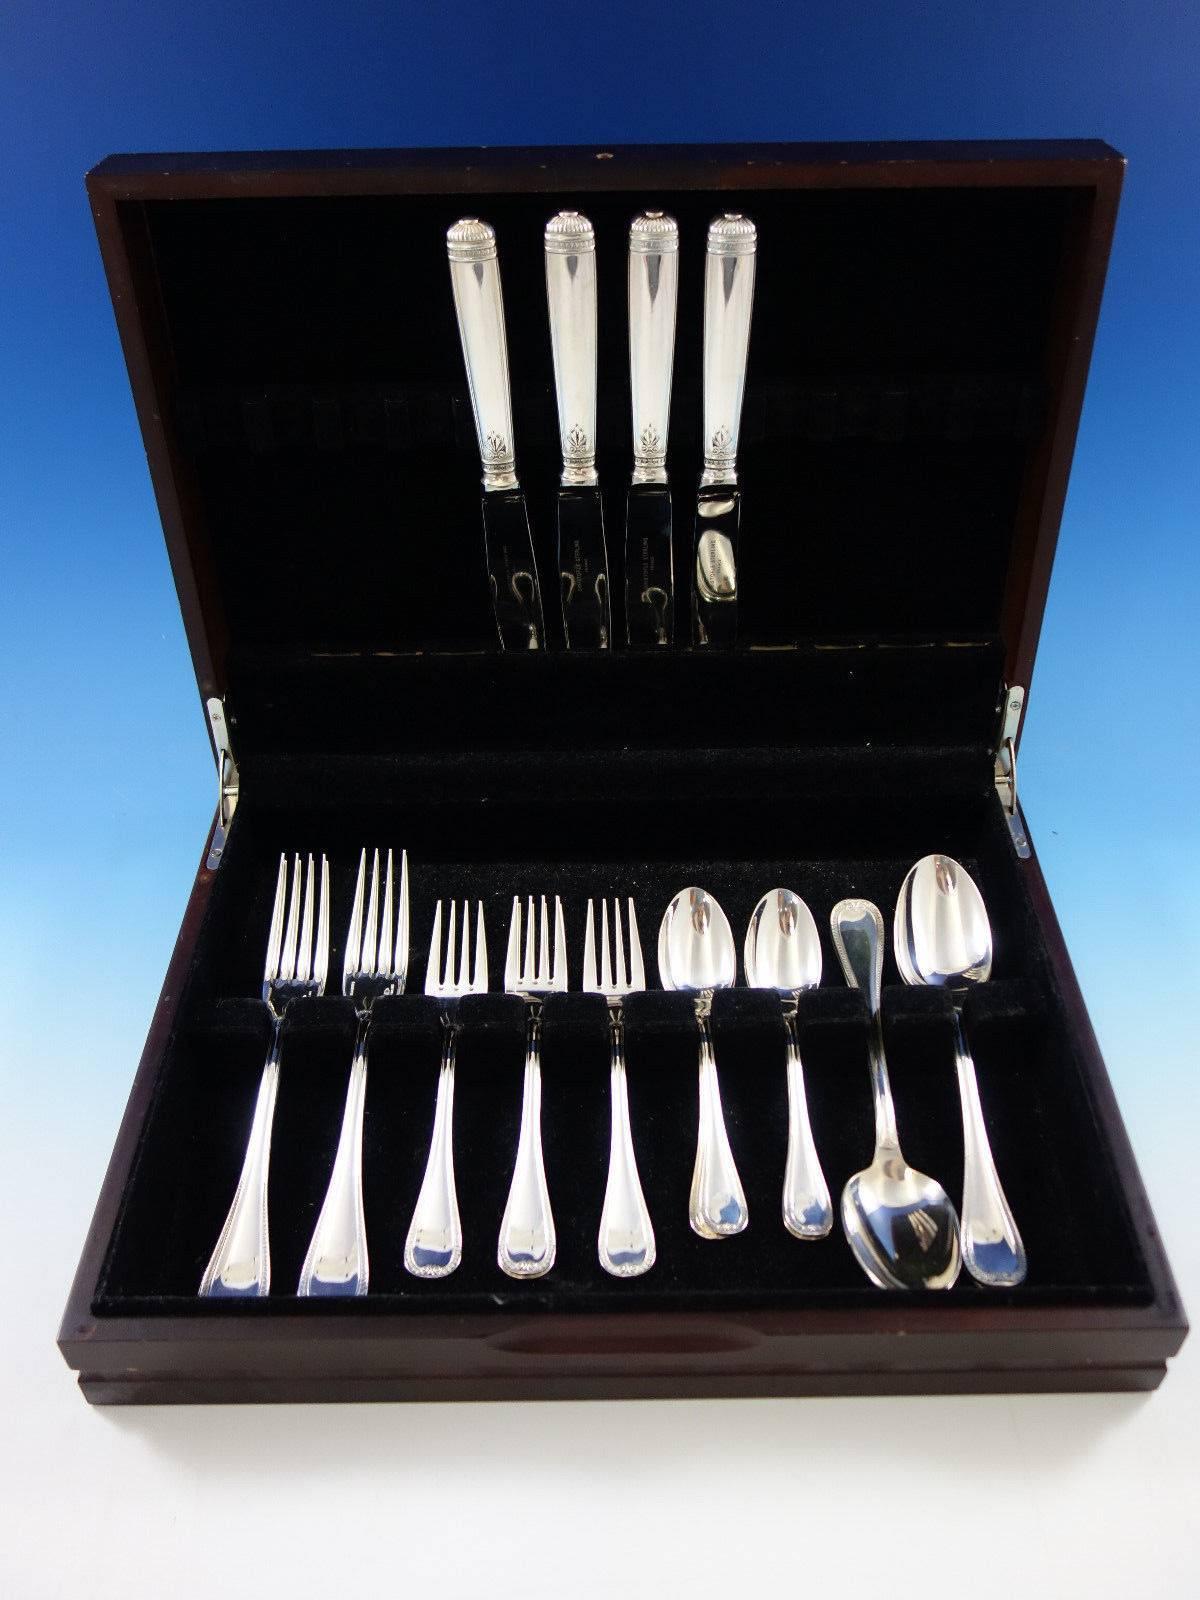 Exquisite dinner size Malmaison by Christofle sterling silver flatware set, 20 pieces. Great starter set! This set includes: four dinner size knives, 9 5/8